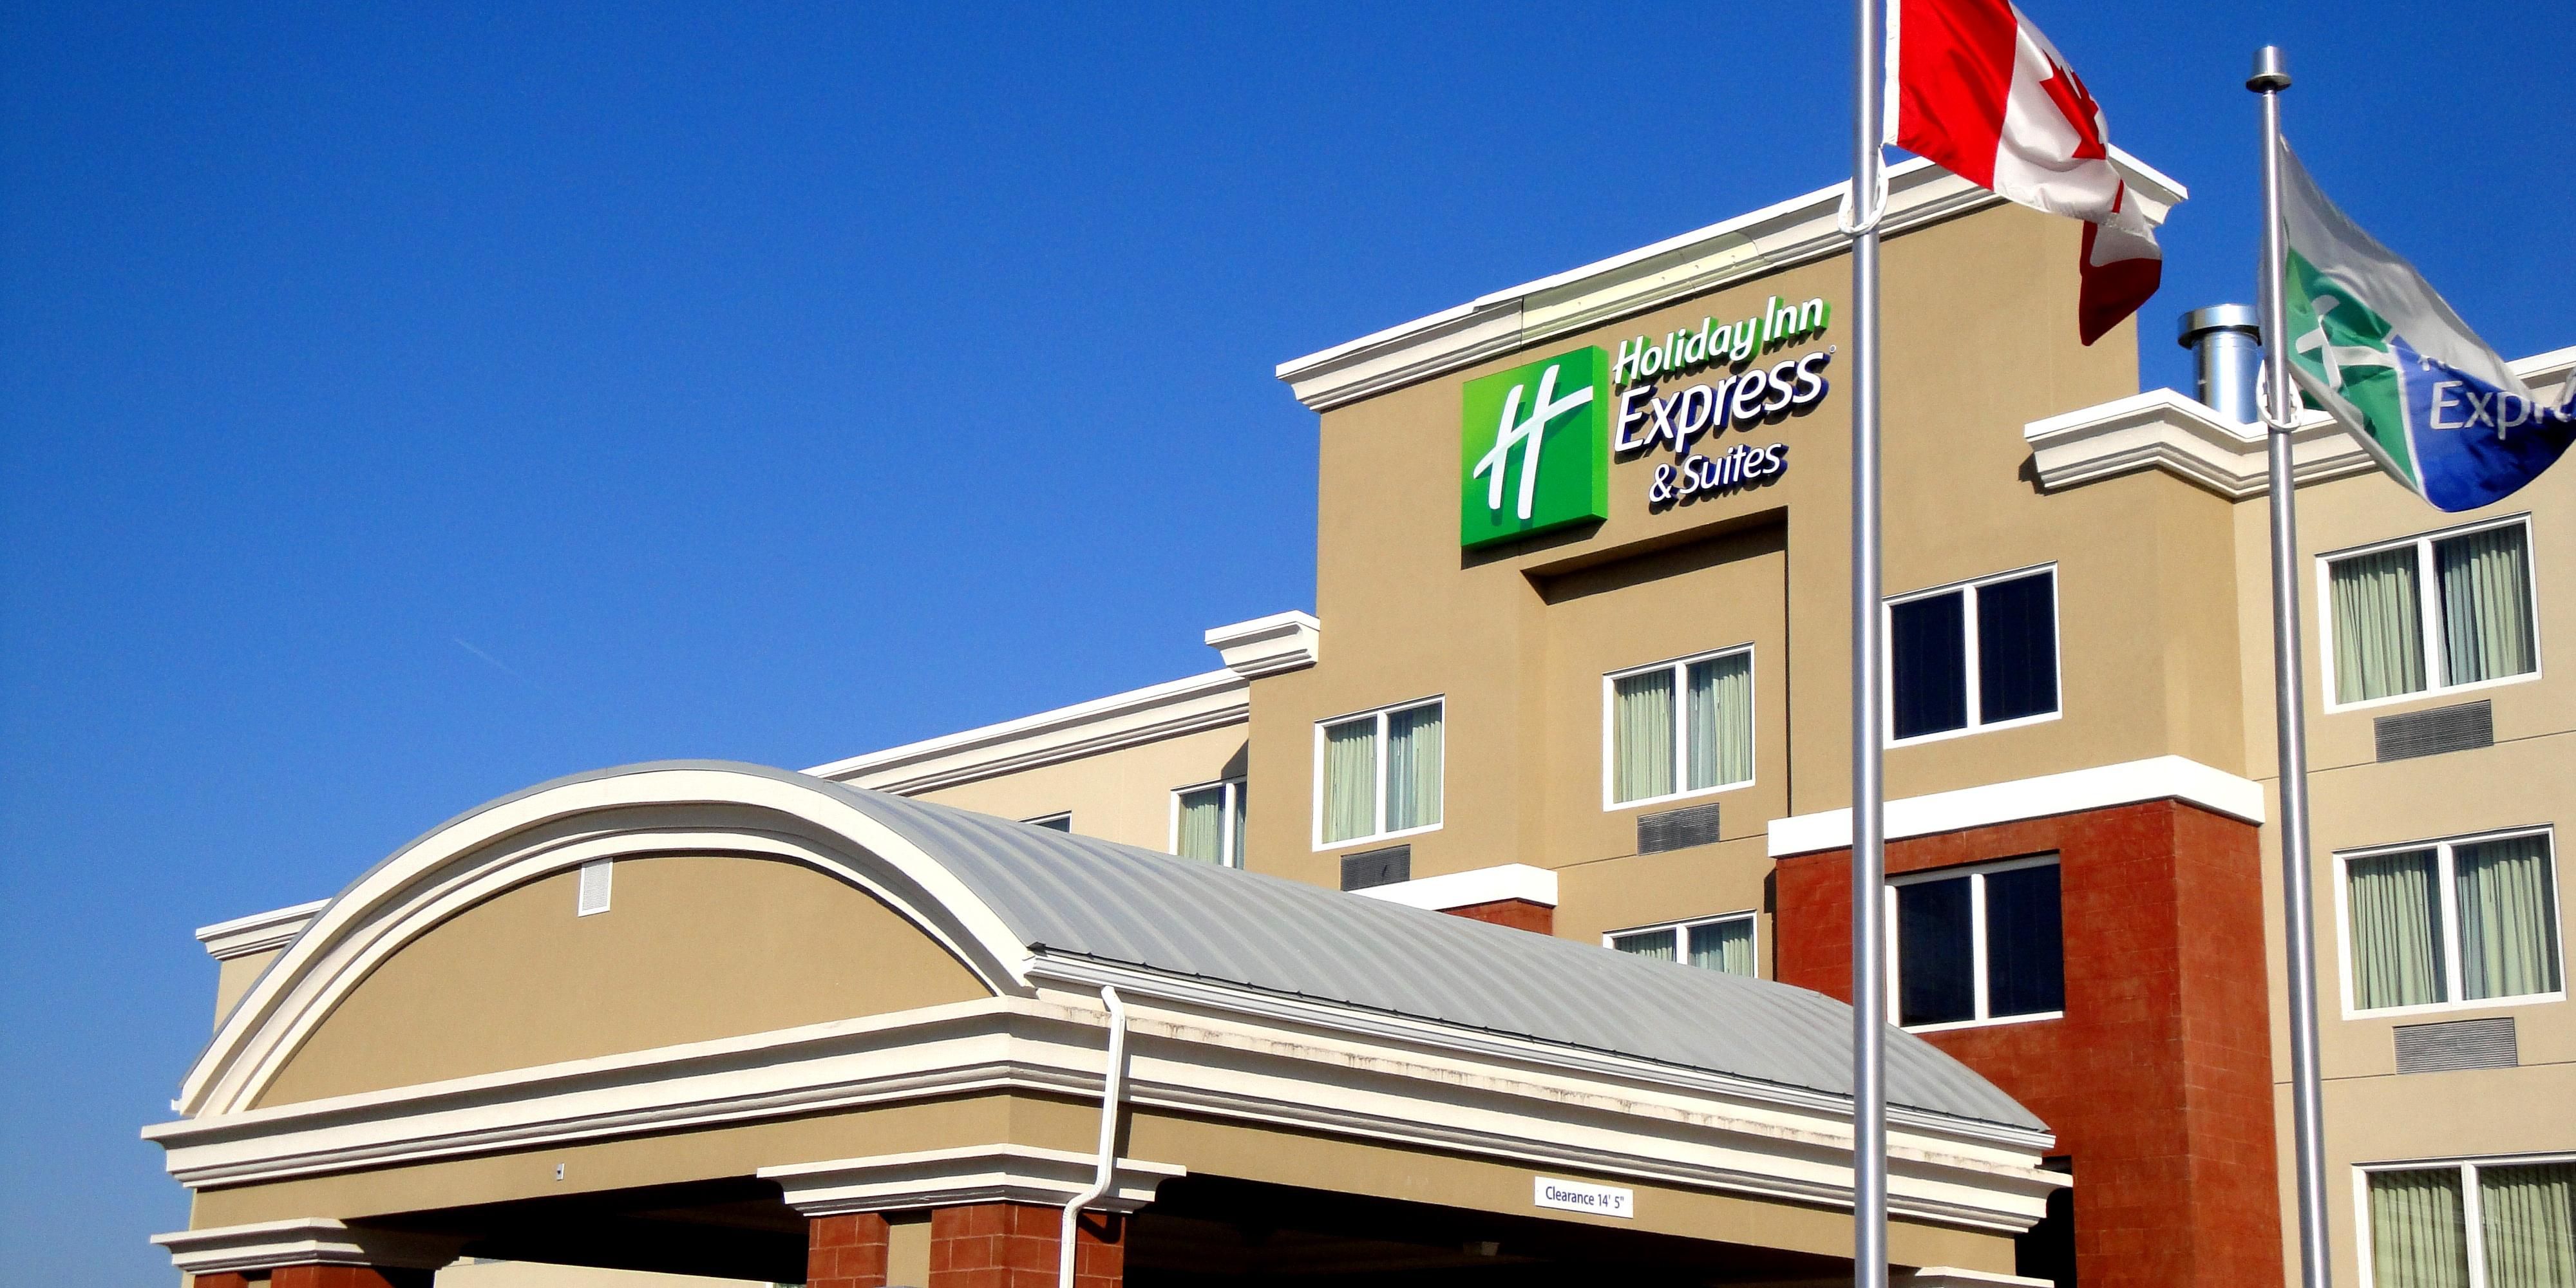 We have ample parking and easy access from highway 15.  We appreciate those in the transportation and distribution industries assisting the country through this crisis.  We have available parking and would be honored to have you as an overnight guest in our hotel.